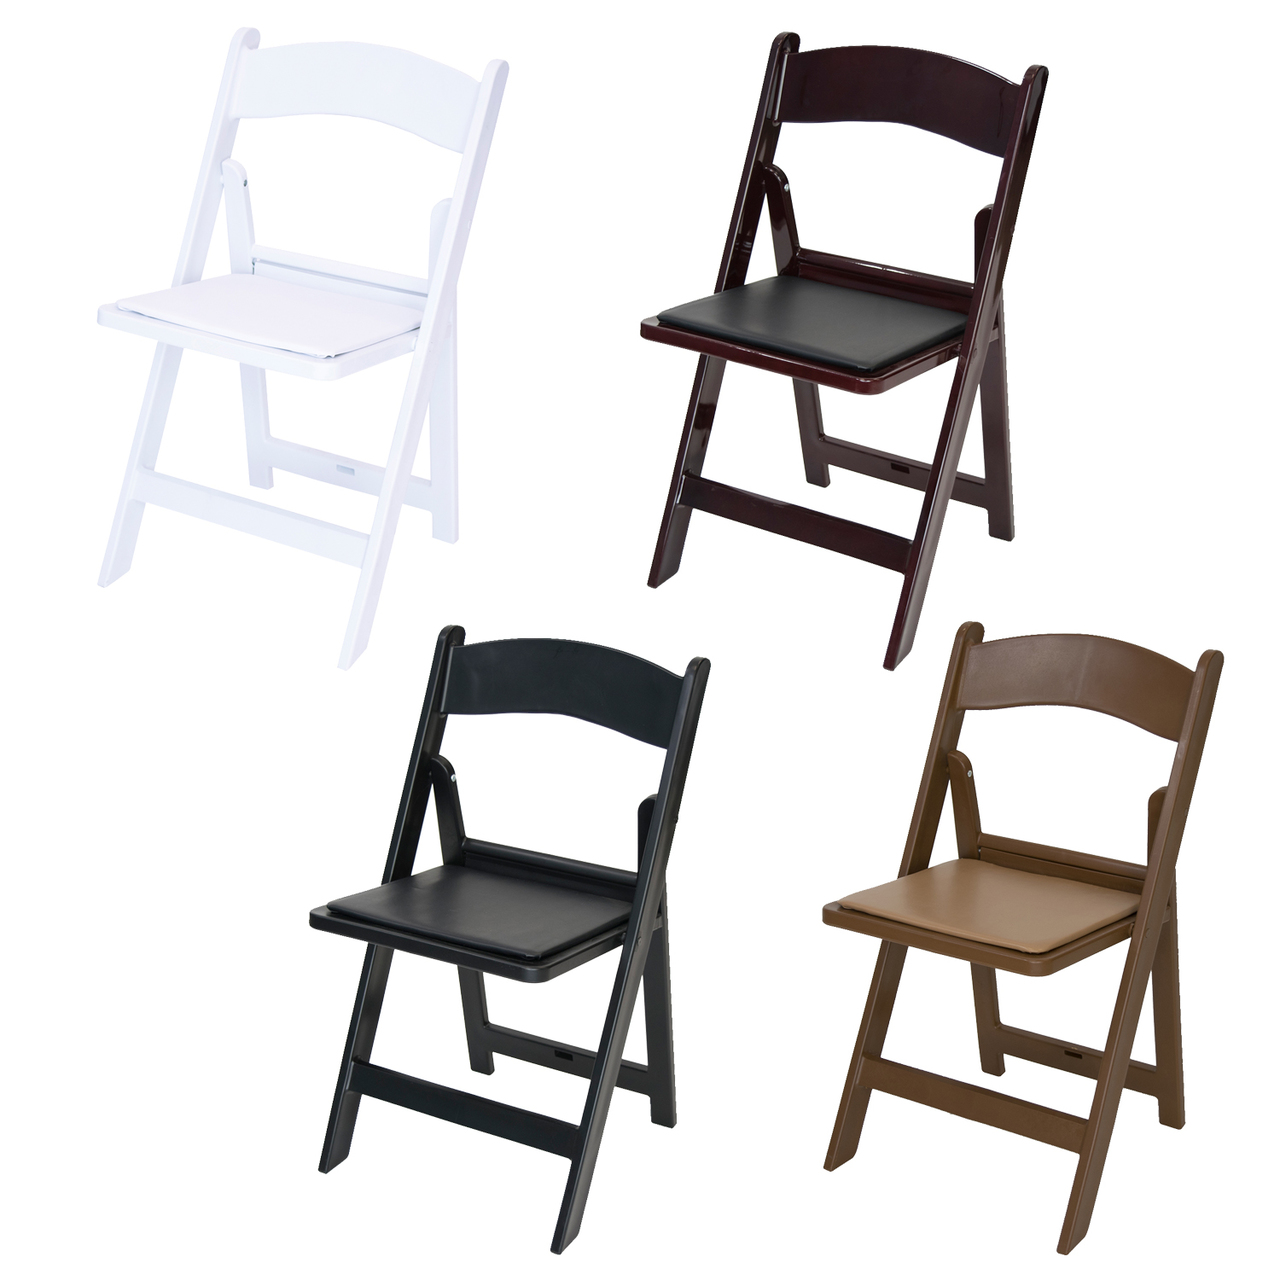 Featured image of post Cheap Folding Chairs And Tables - Find foldable tables available in a variety of sizes, shapes and styles here.